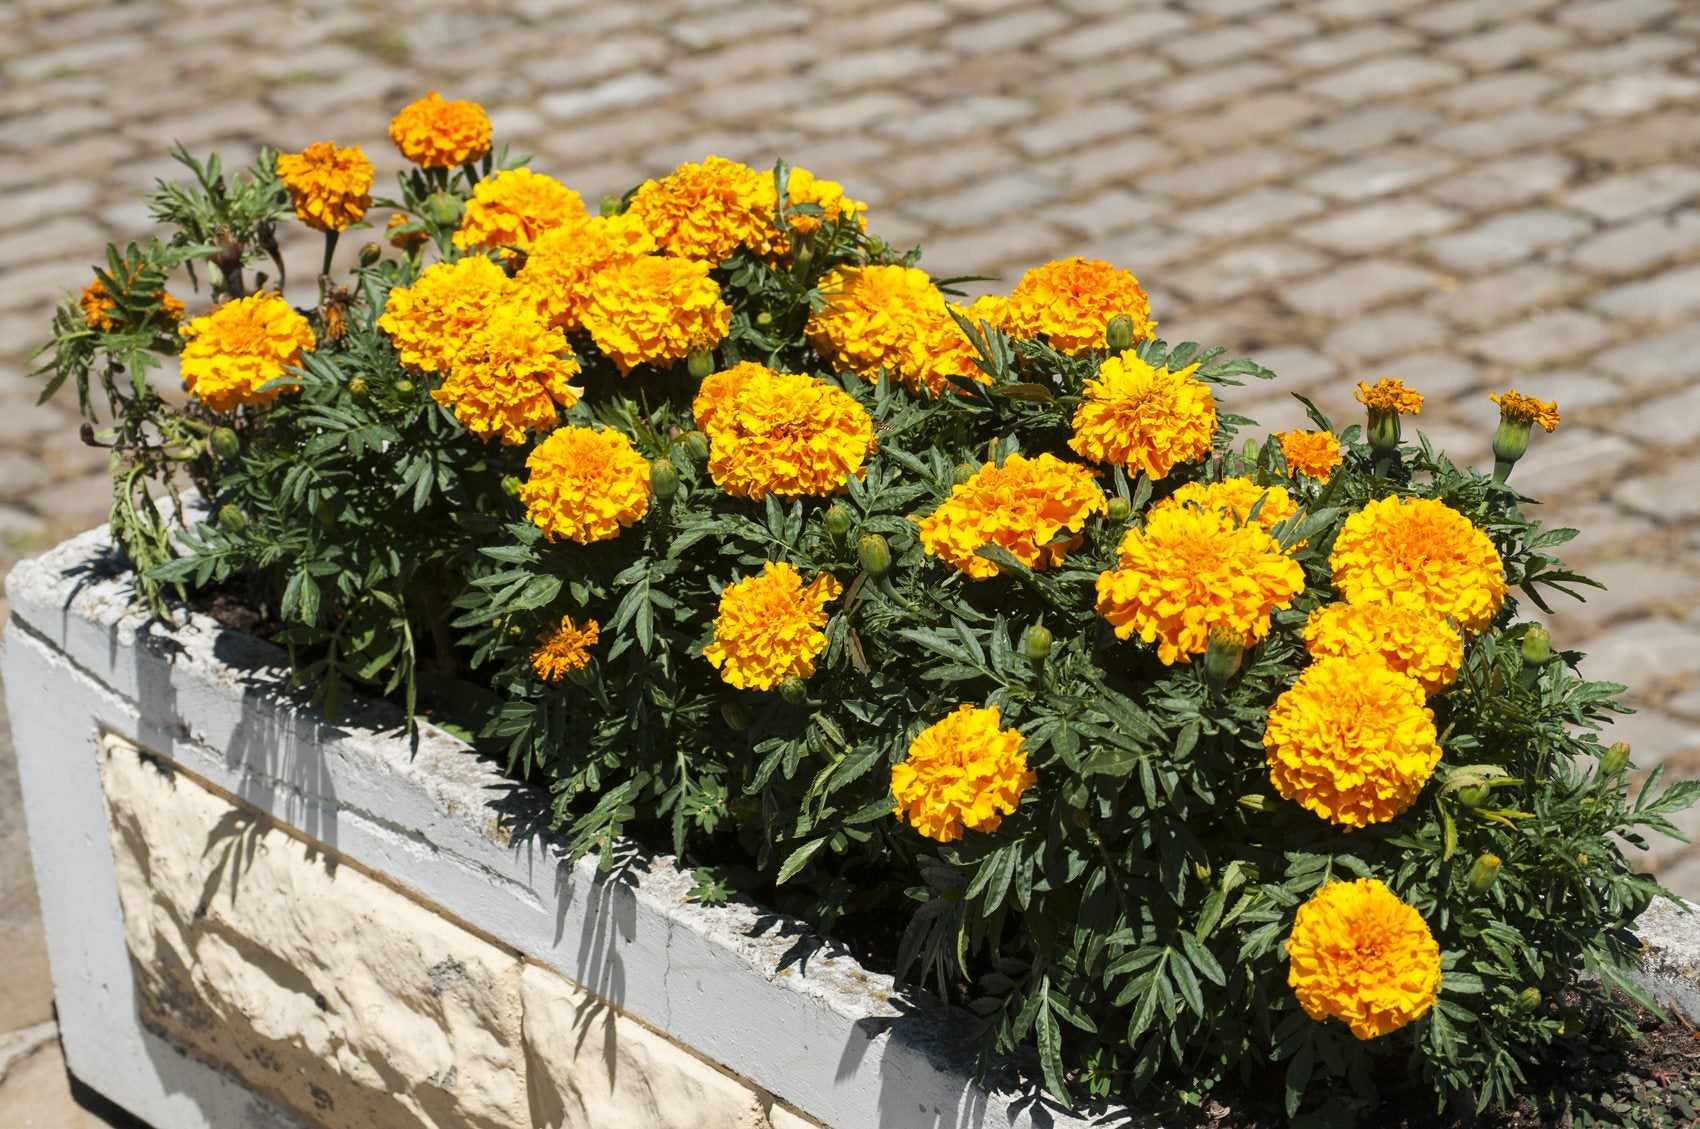 Potted Marigold Plants: Learn How To Grow Marigolds In Containers